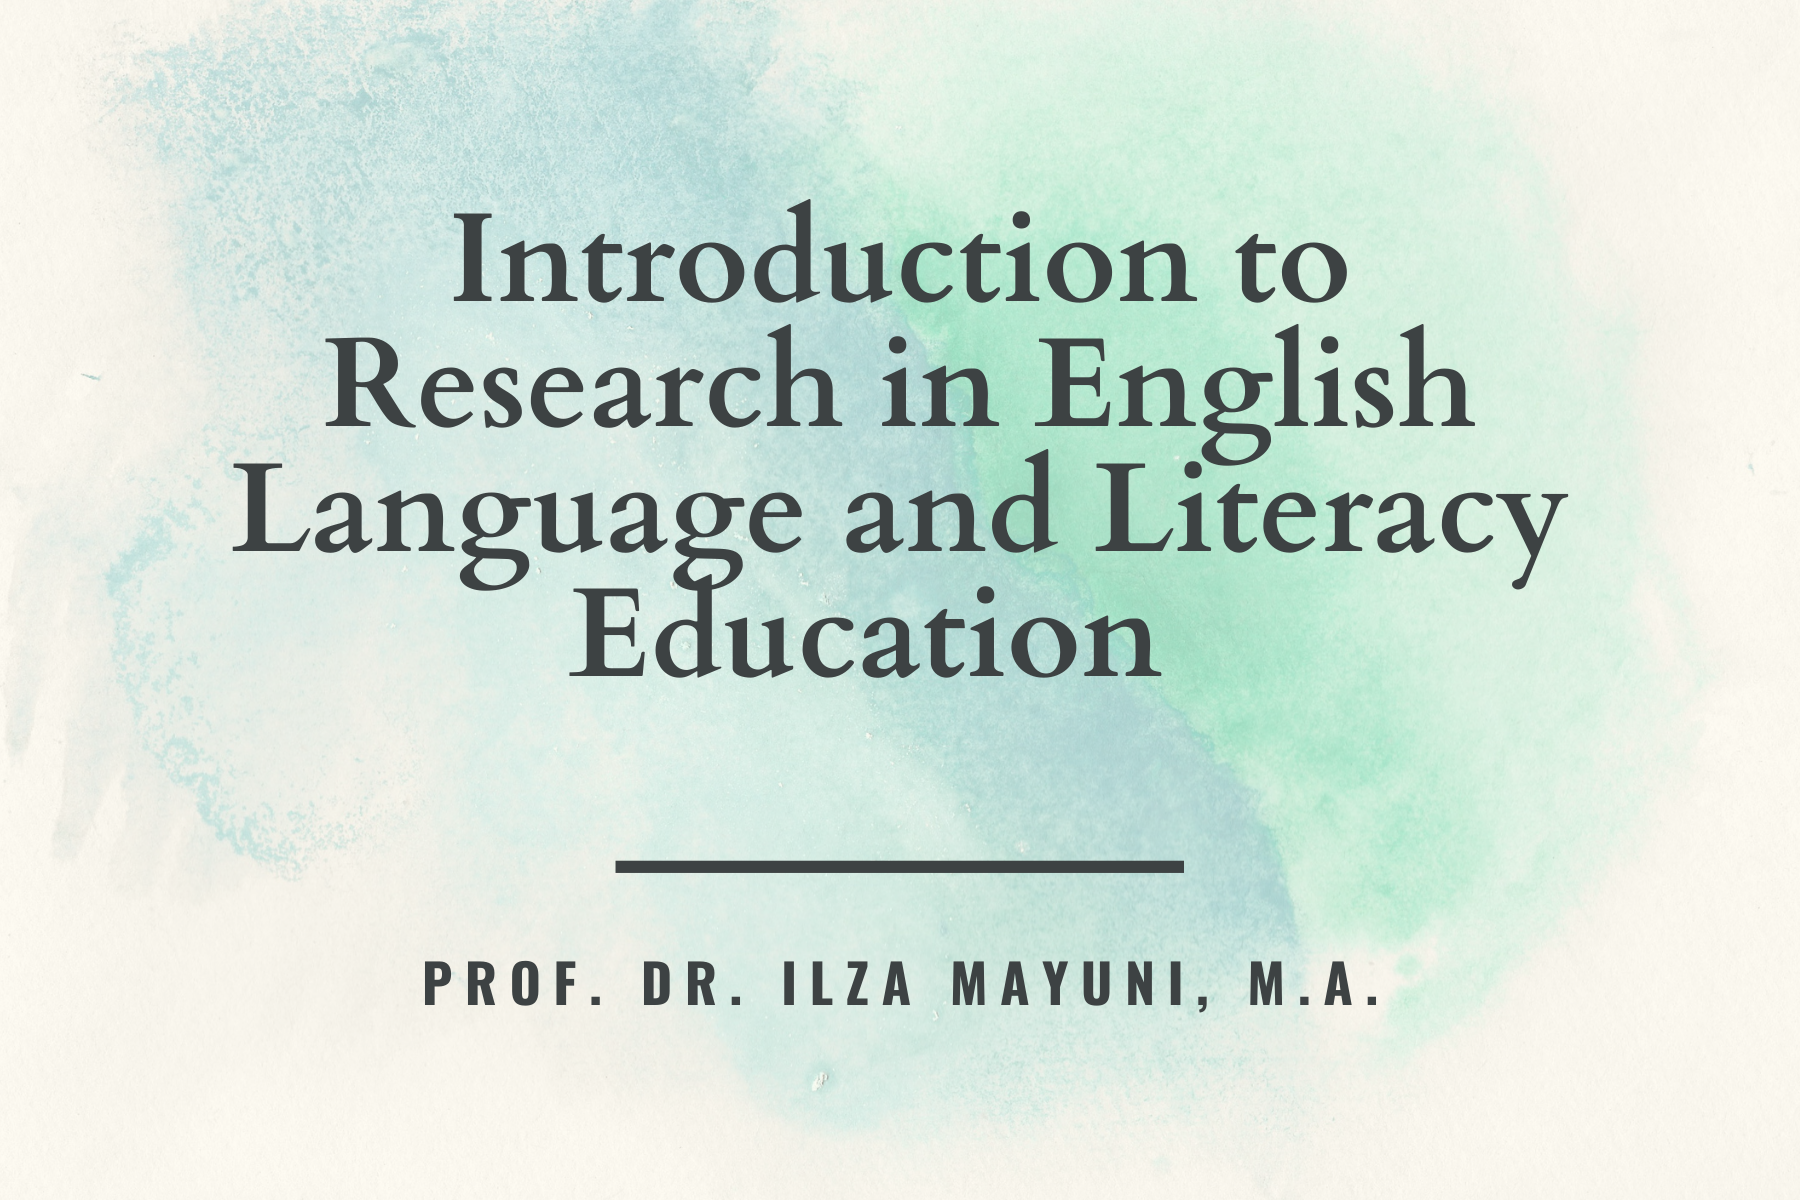 Introduction to Research in English Language and Literacy Education 19A